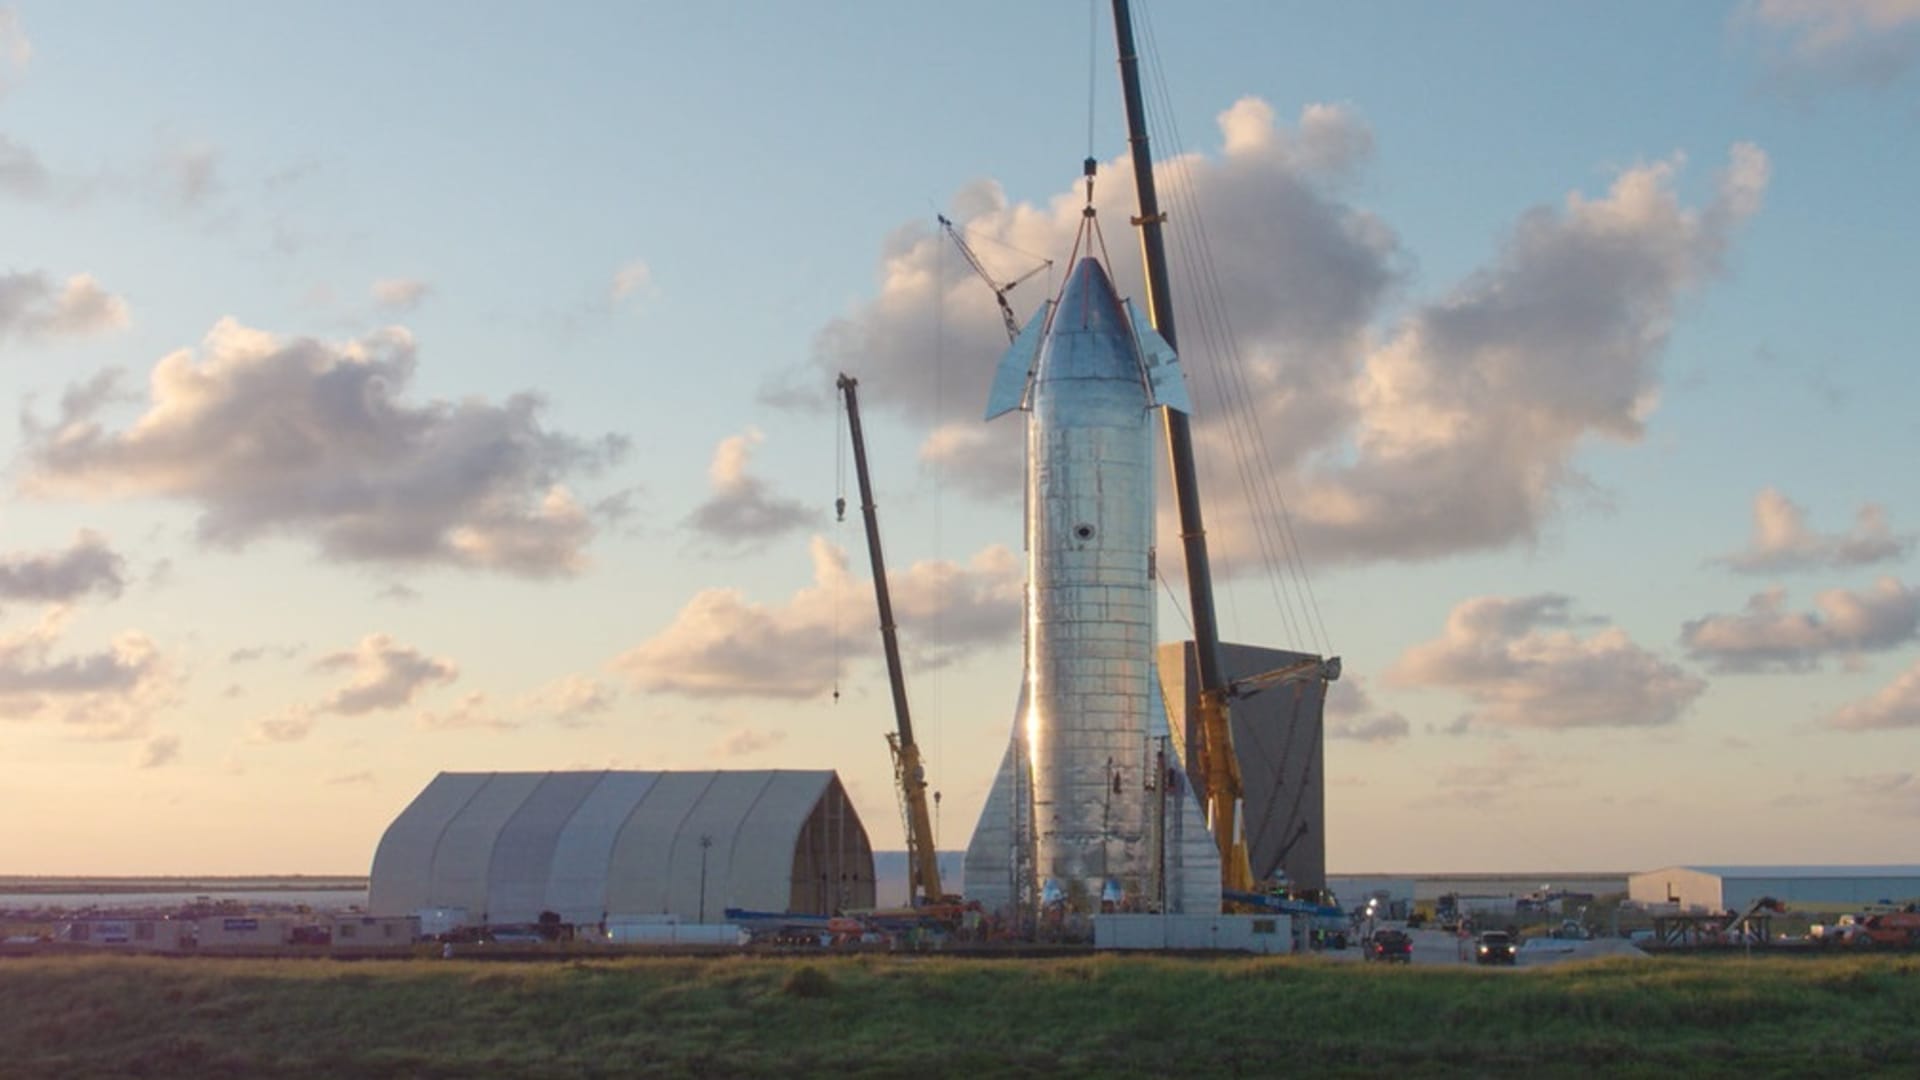 SpaceX's first Starship prototype under construction near Boca Chica, Texas in 2019.